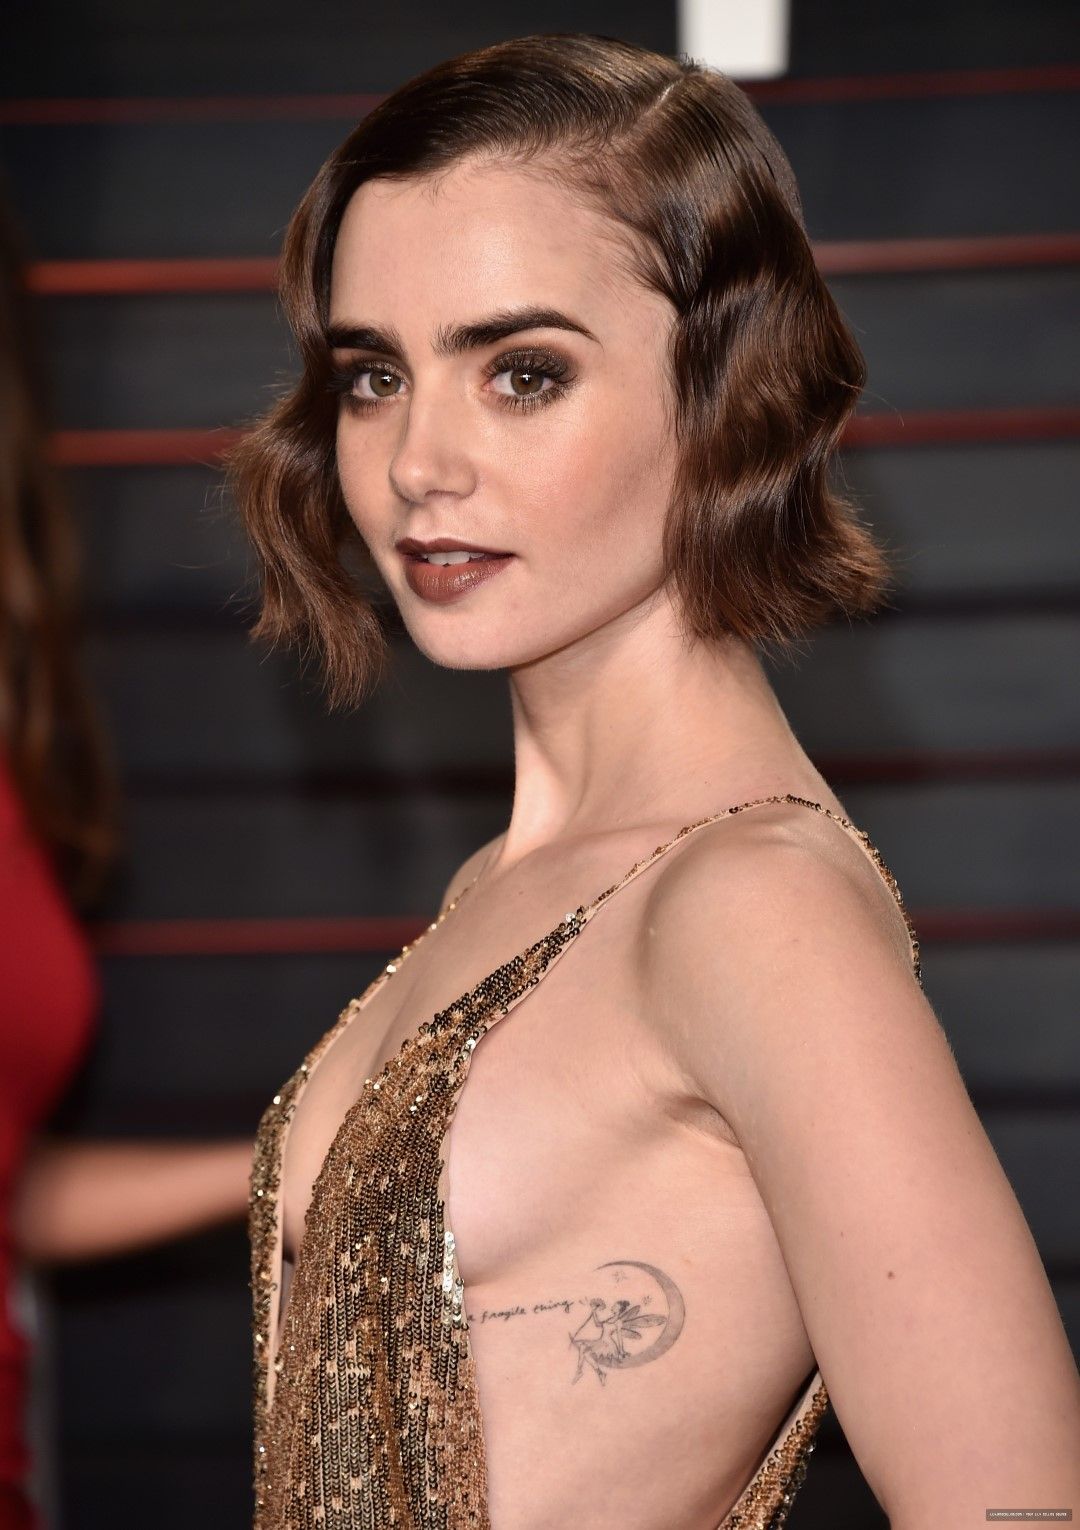 Lily collins sexy